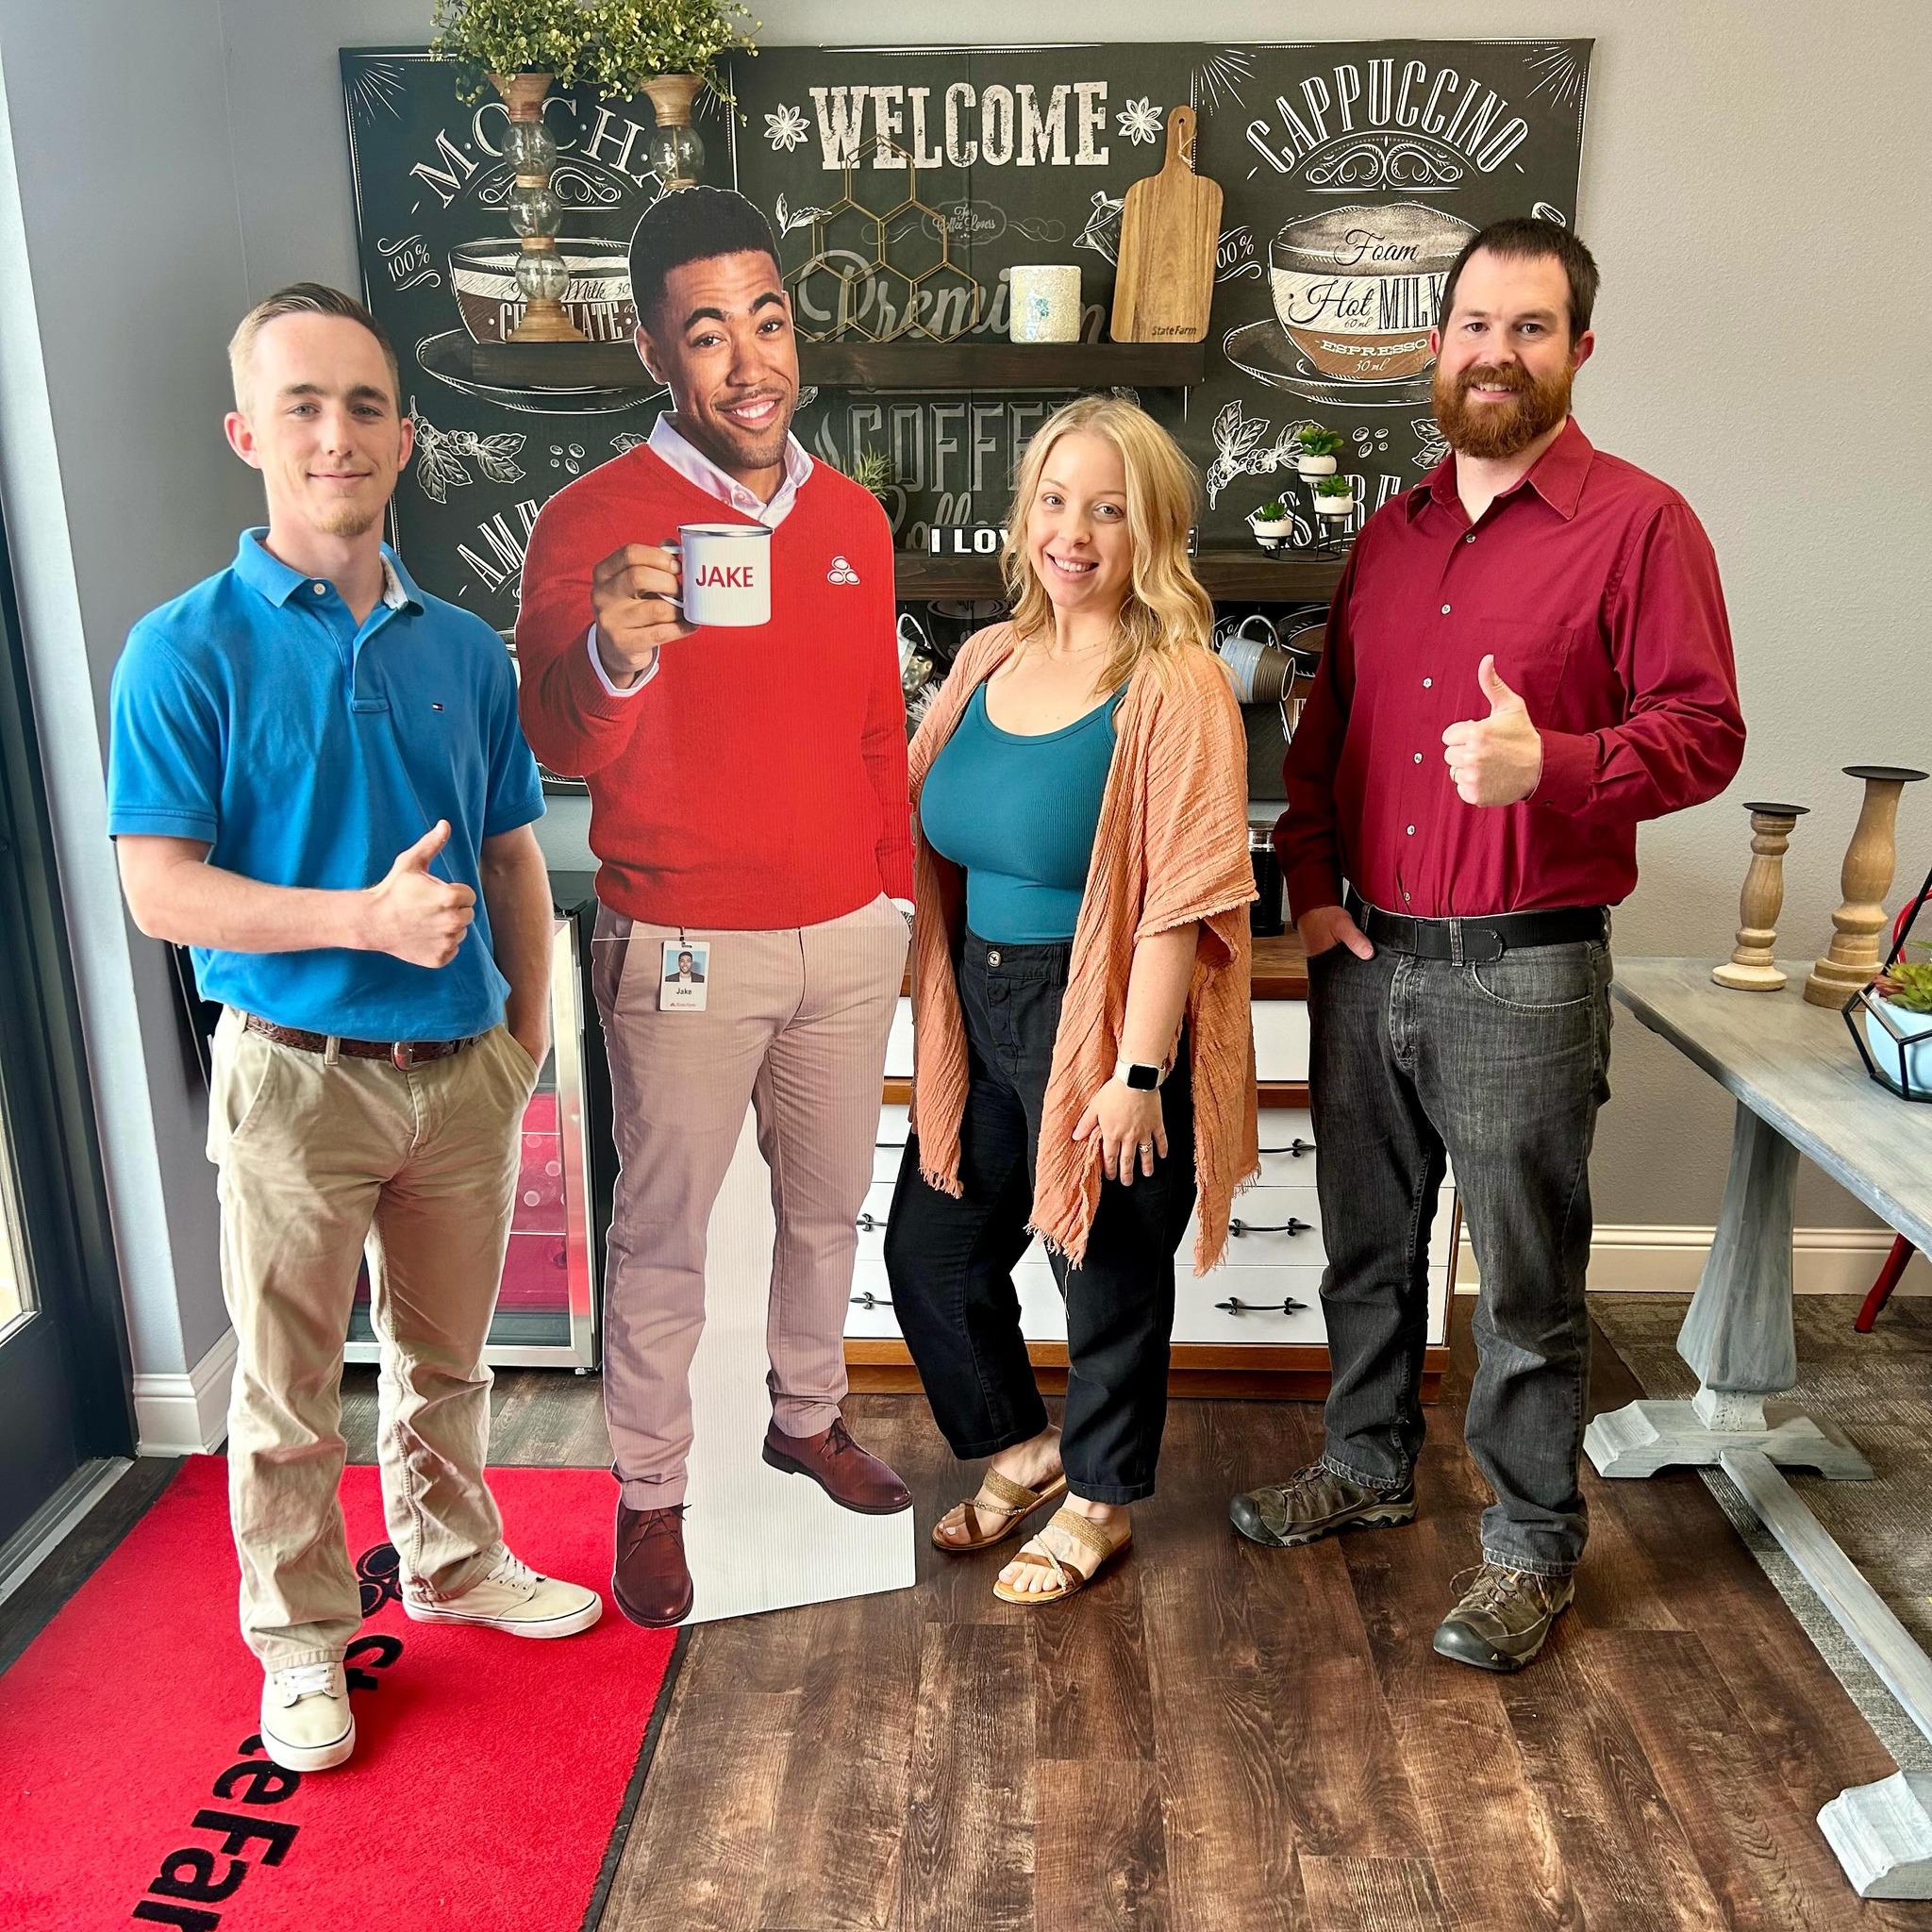 Happy Administrative Professionals Day! 

Our service team works hard to provide our customers with the help they need. We are grateful to have Jack, Laurie, and Ben apart of our team!

If you want quality service and savings, contact us today!